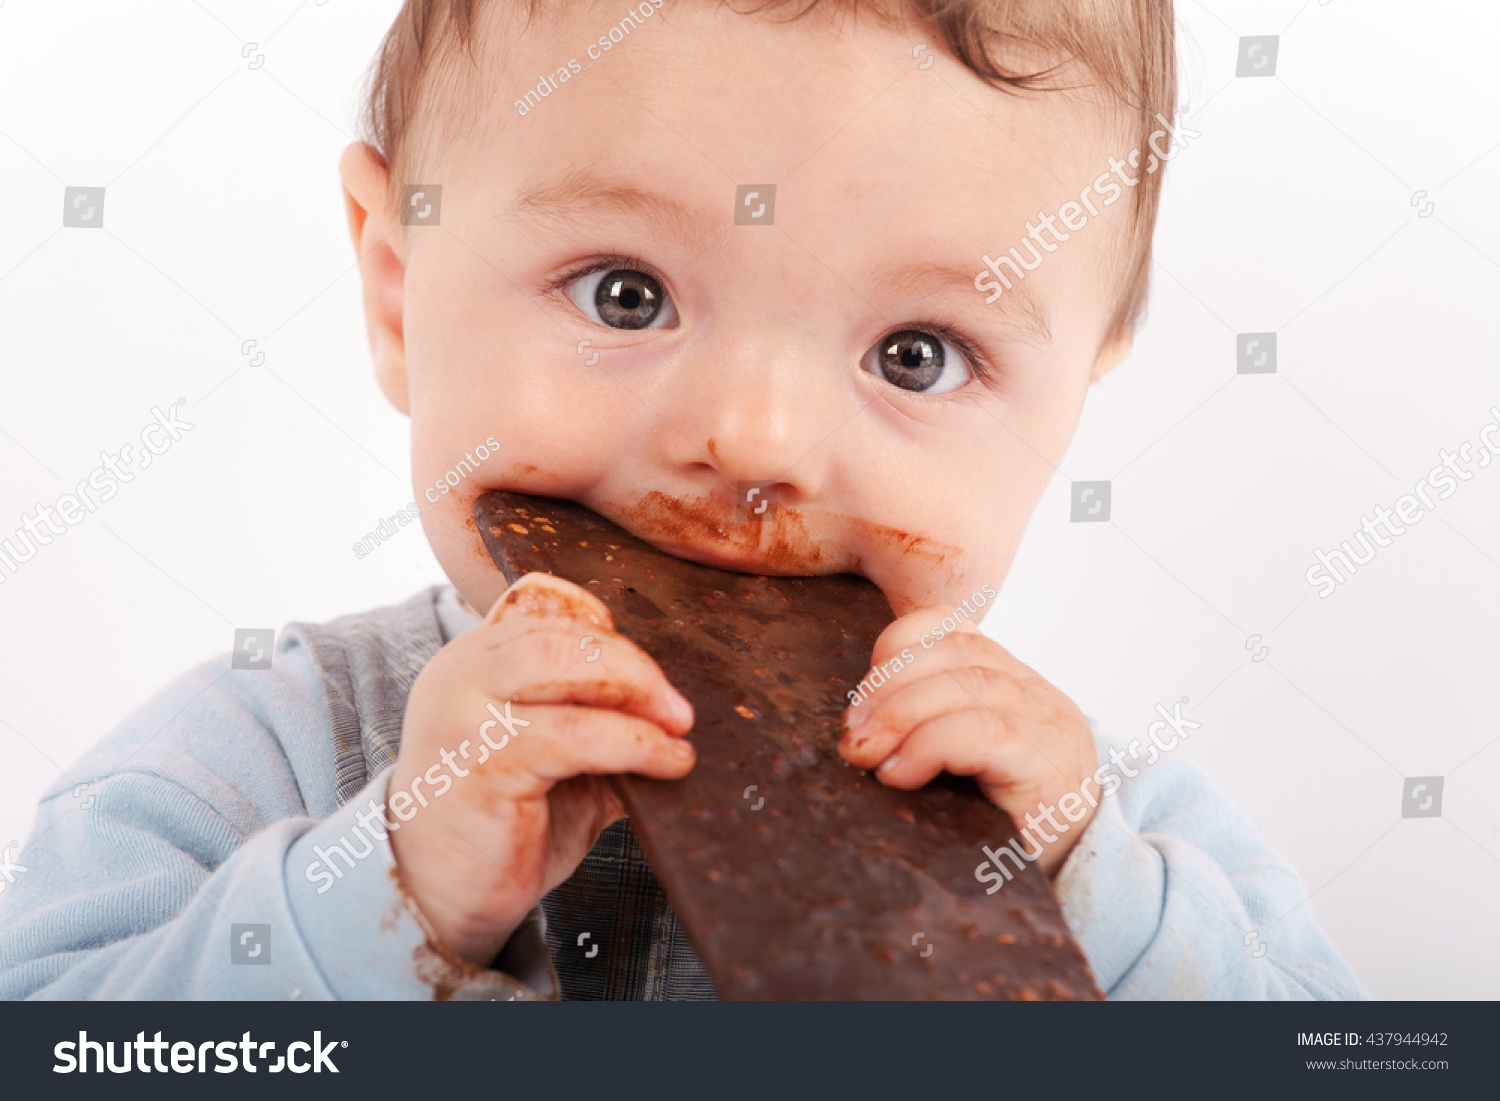 Image for cute babies eating chocolate